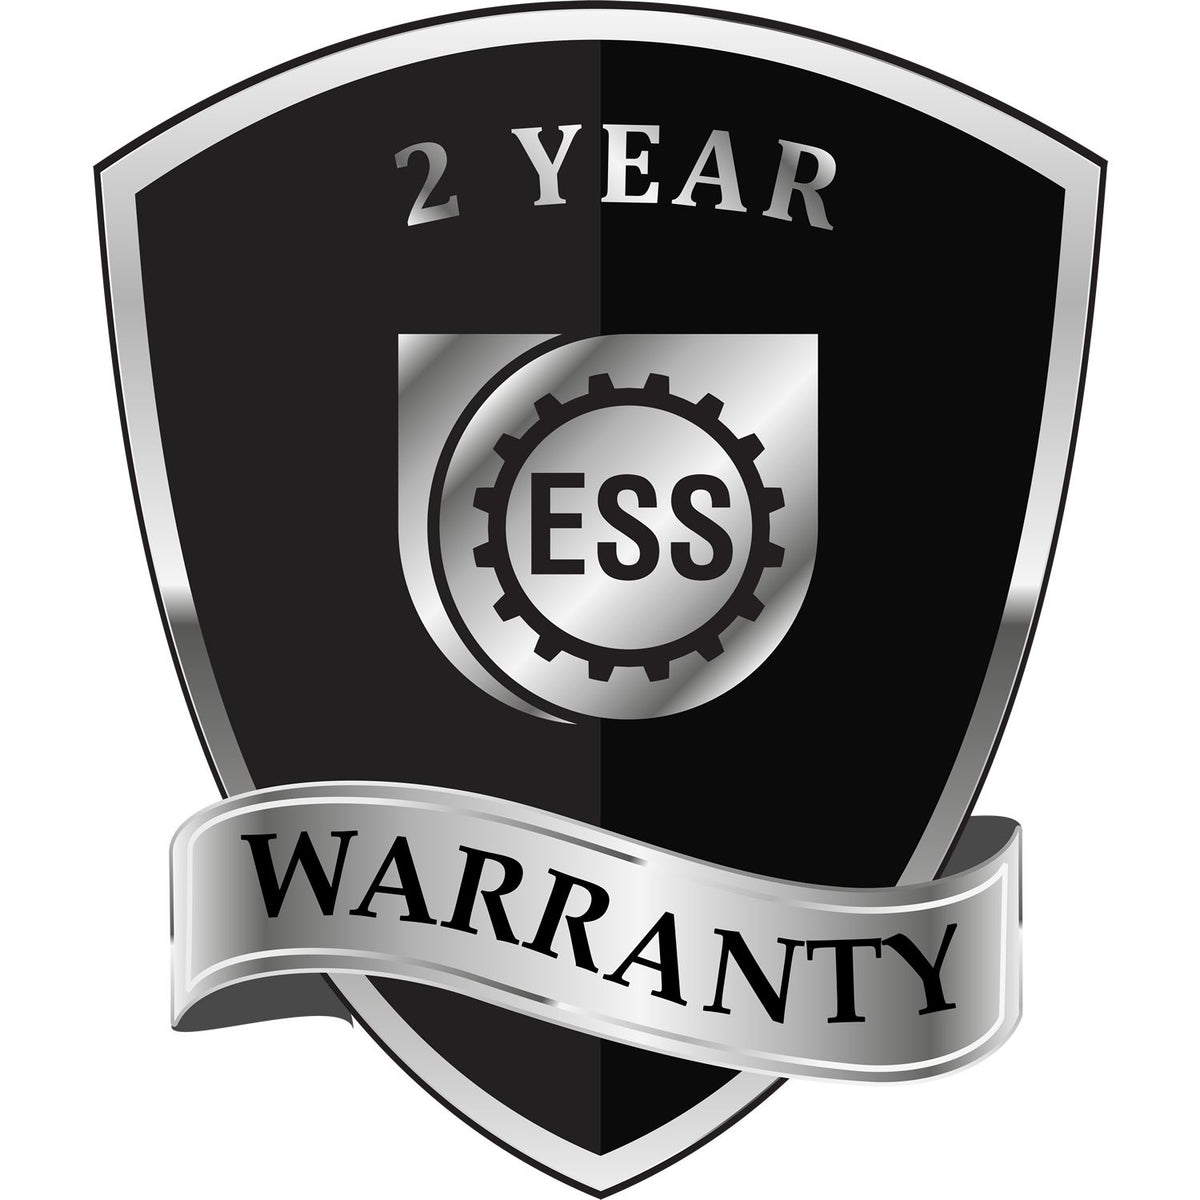 A badge or emblem showing a warranty icon for the Virginia Desk Architect Embossing Seal